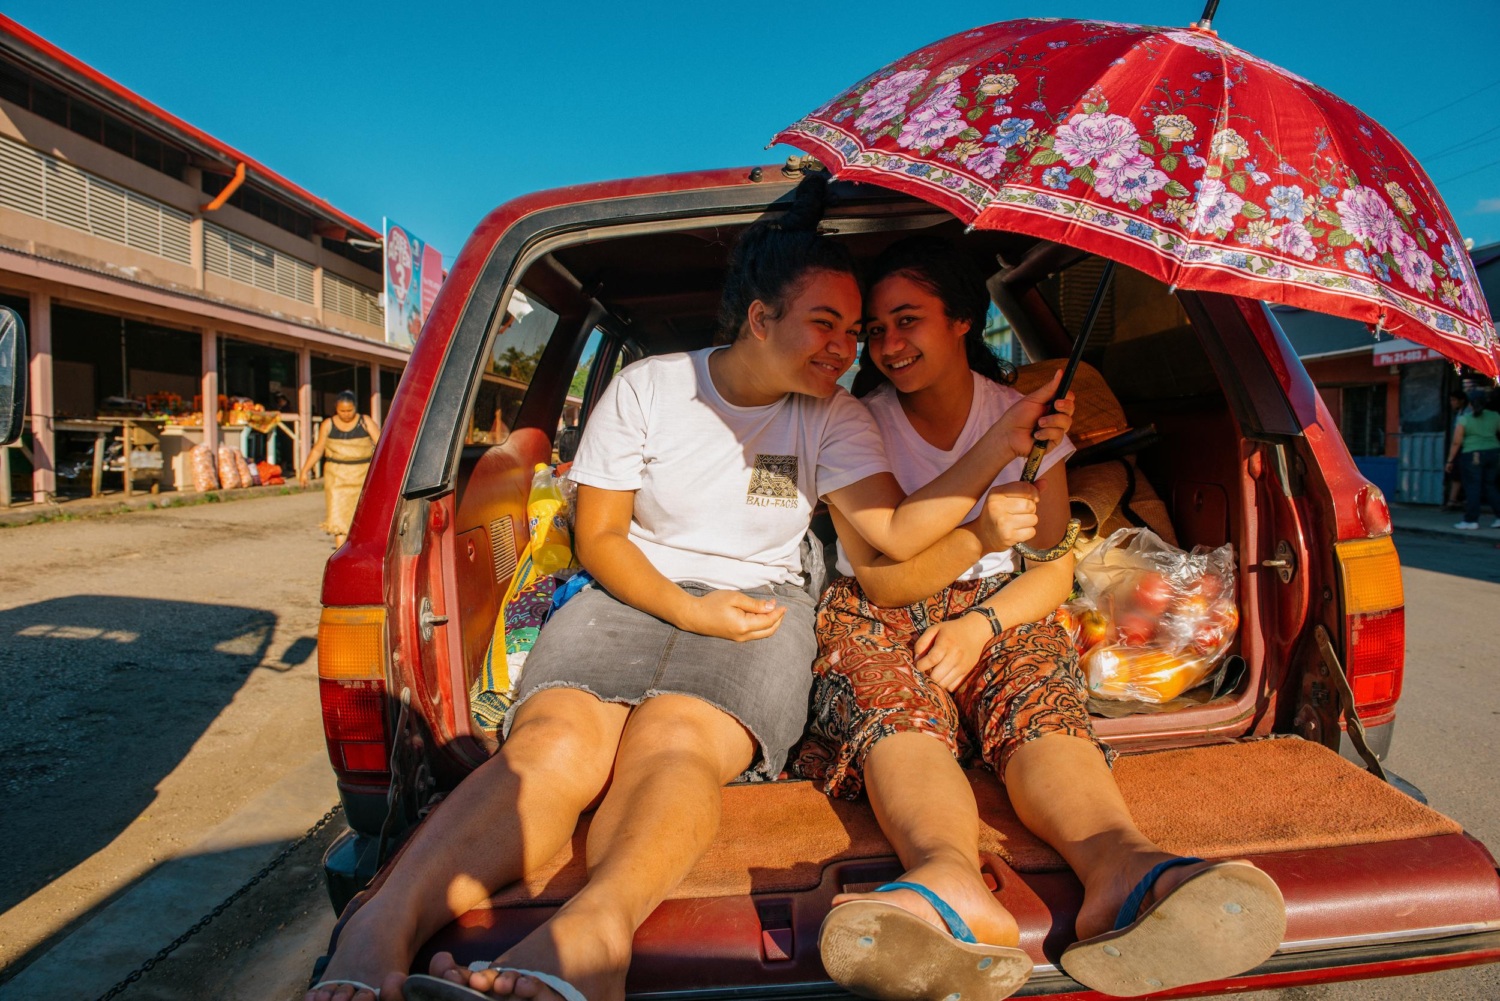 Two teen girls relaxing in the boot of a car, holding up an umbrella for shade, outside the old municipal markets in Tonga.